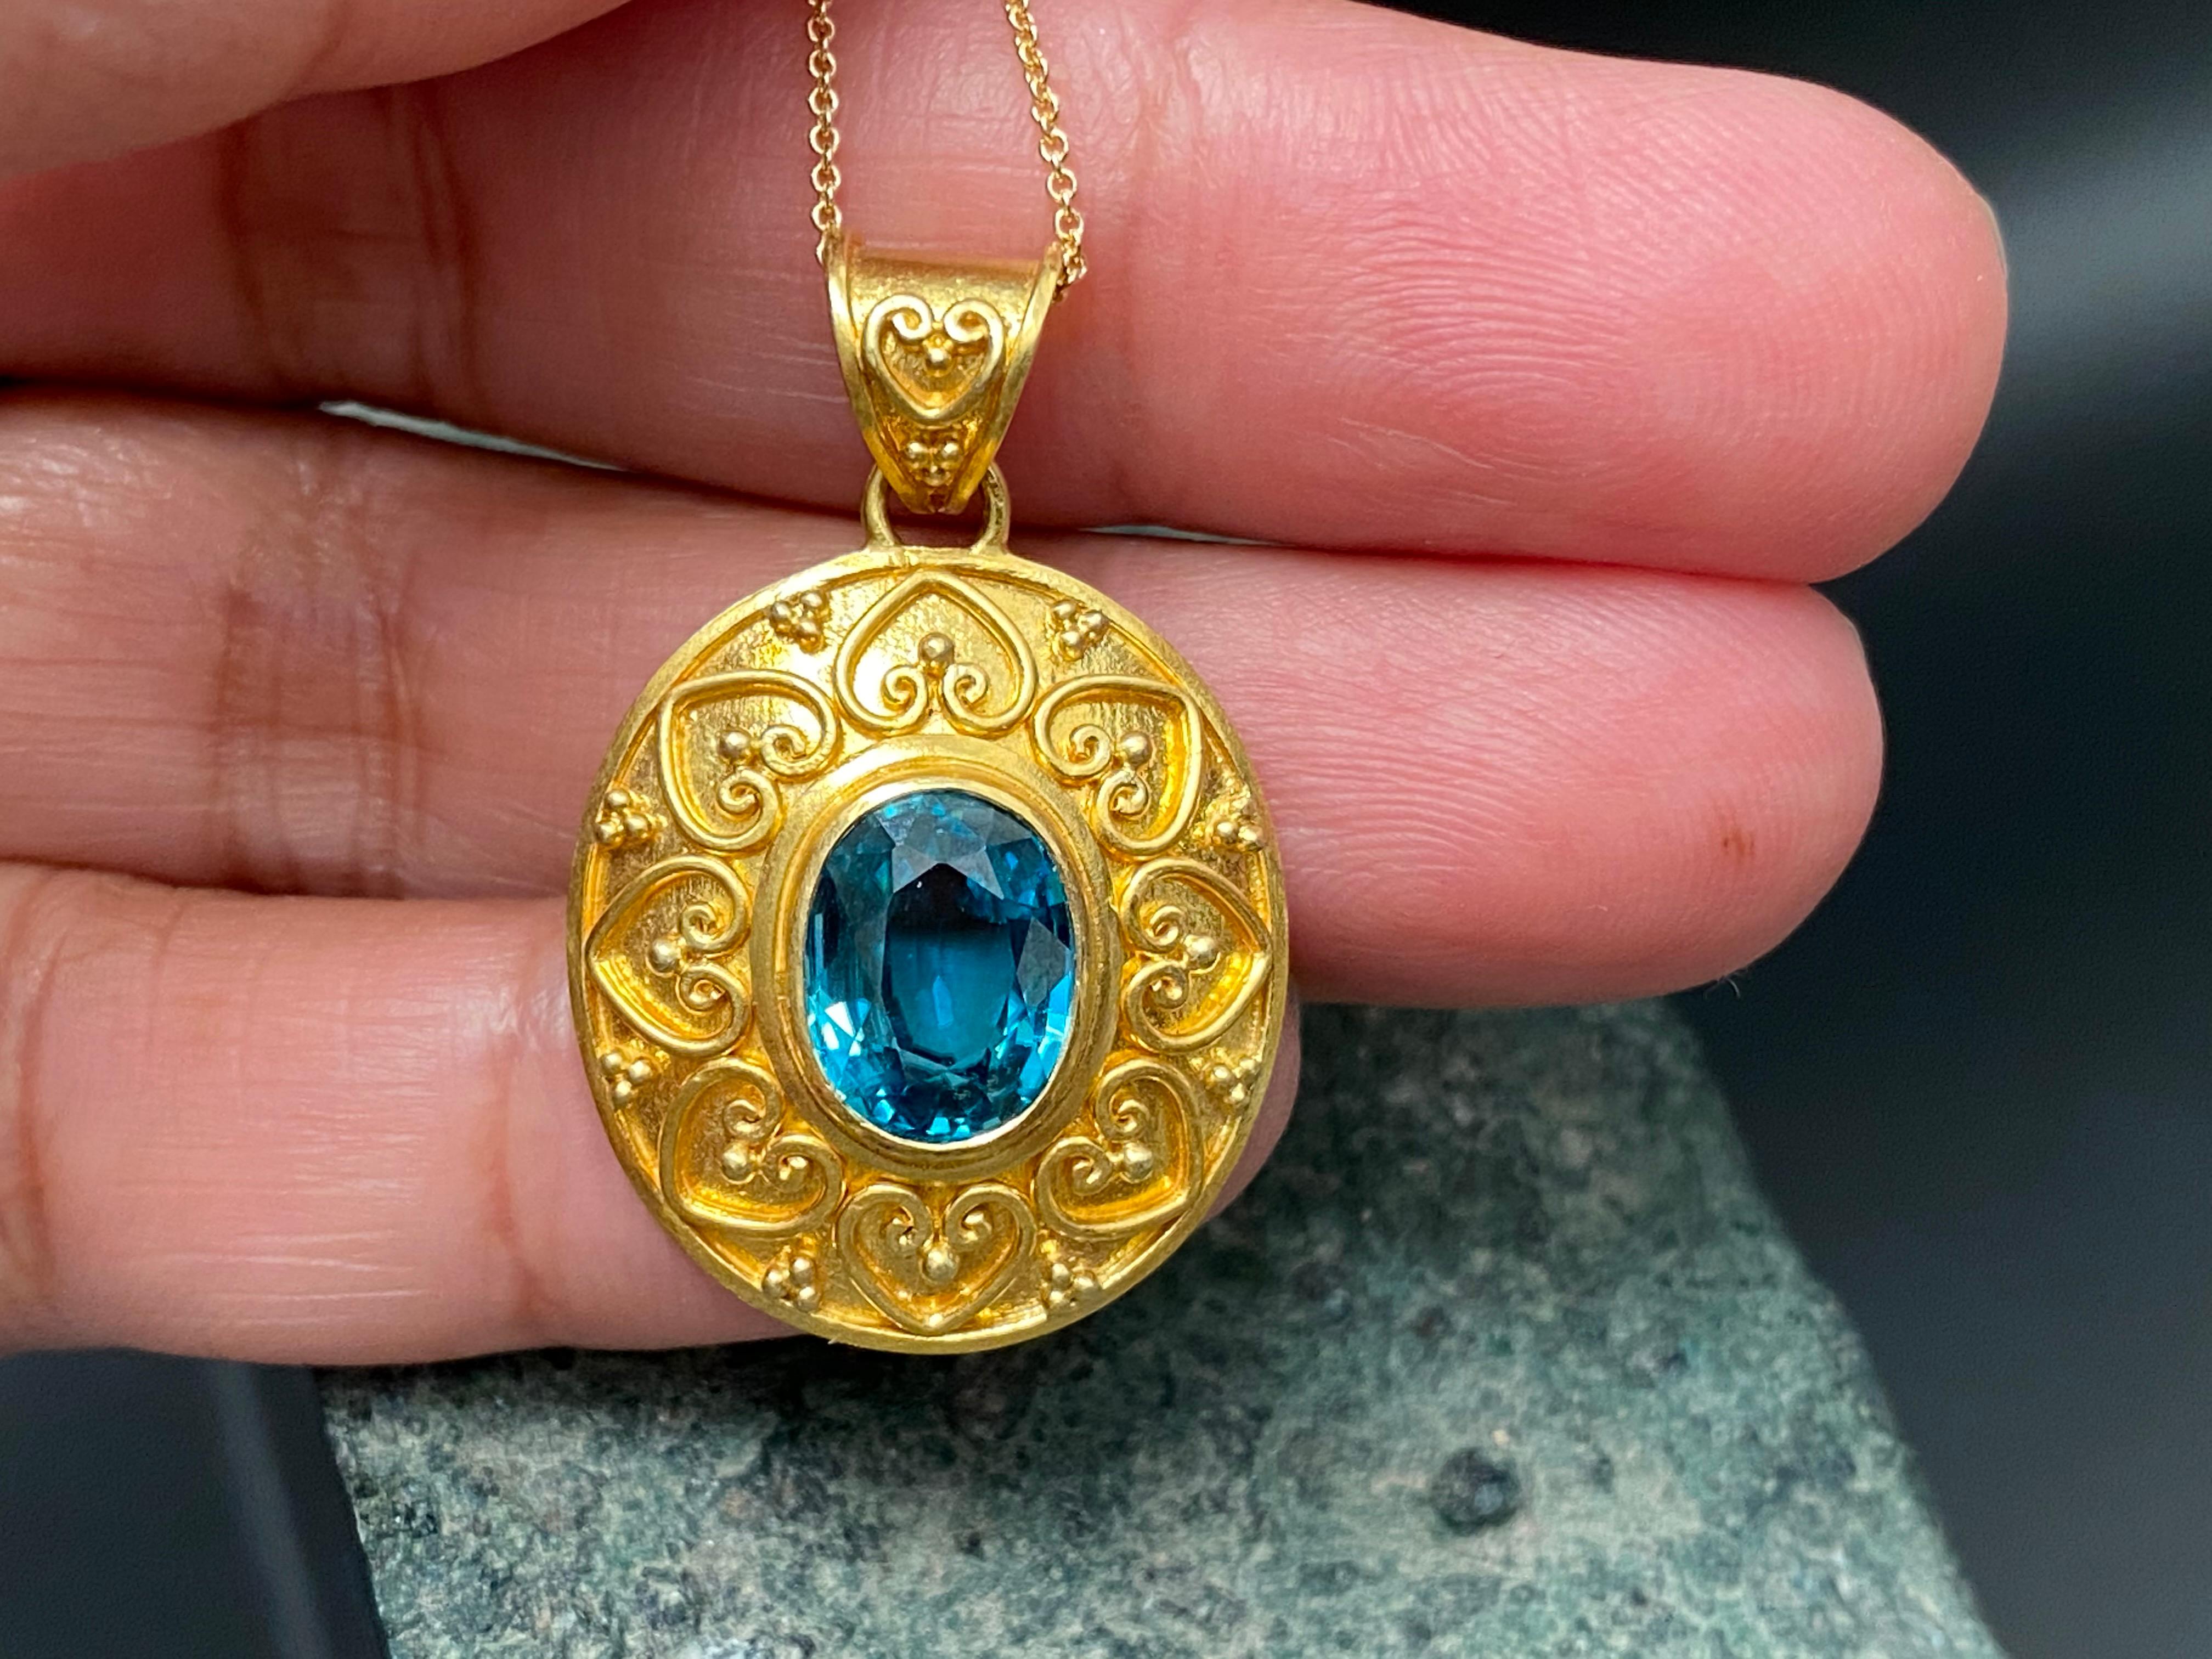 Beautiful handcrafted ornate 4.5 carat deep Blue Zircon pendant in Matt finish 22K.  Blue Zircon is sourced  from the Ratanakiri province of Cambodia, which means “Mountain of Gems” in Khmer, the local language.  This pendant is created by soldering